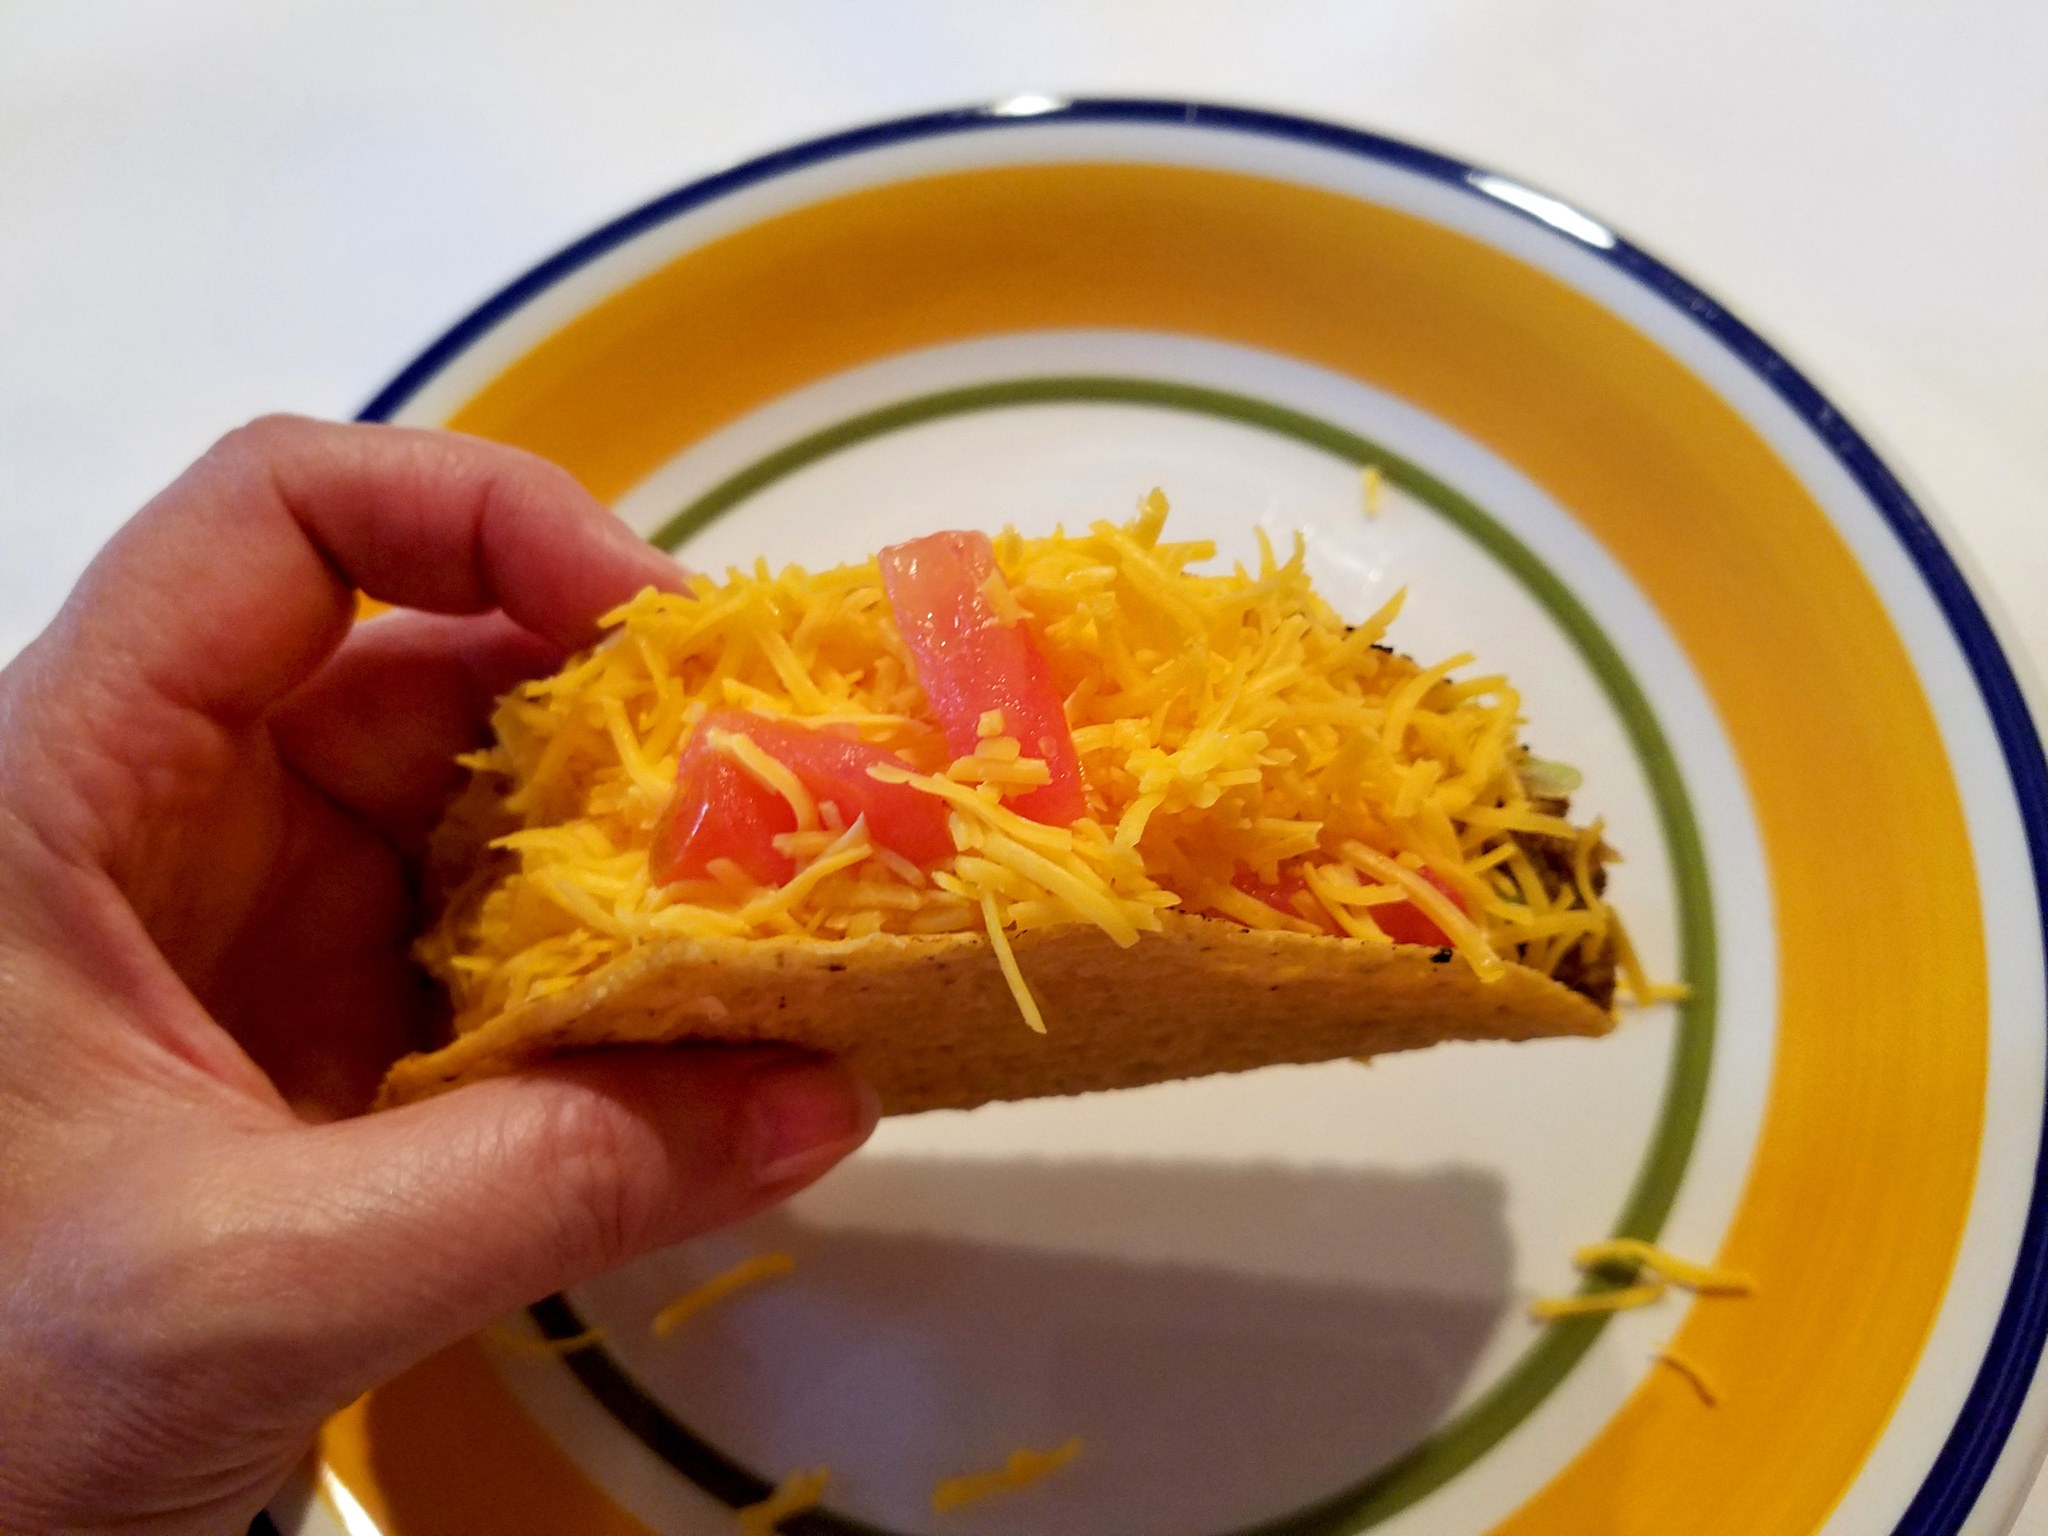 A hand holding a hard taco with lots of cheese.